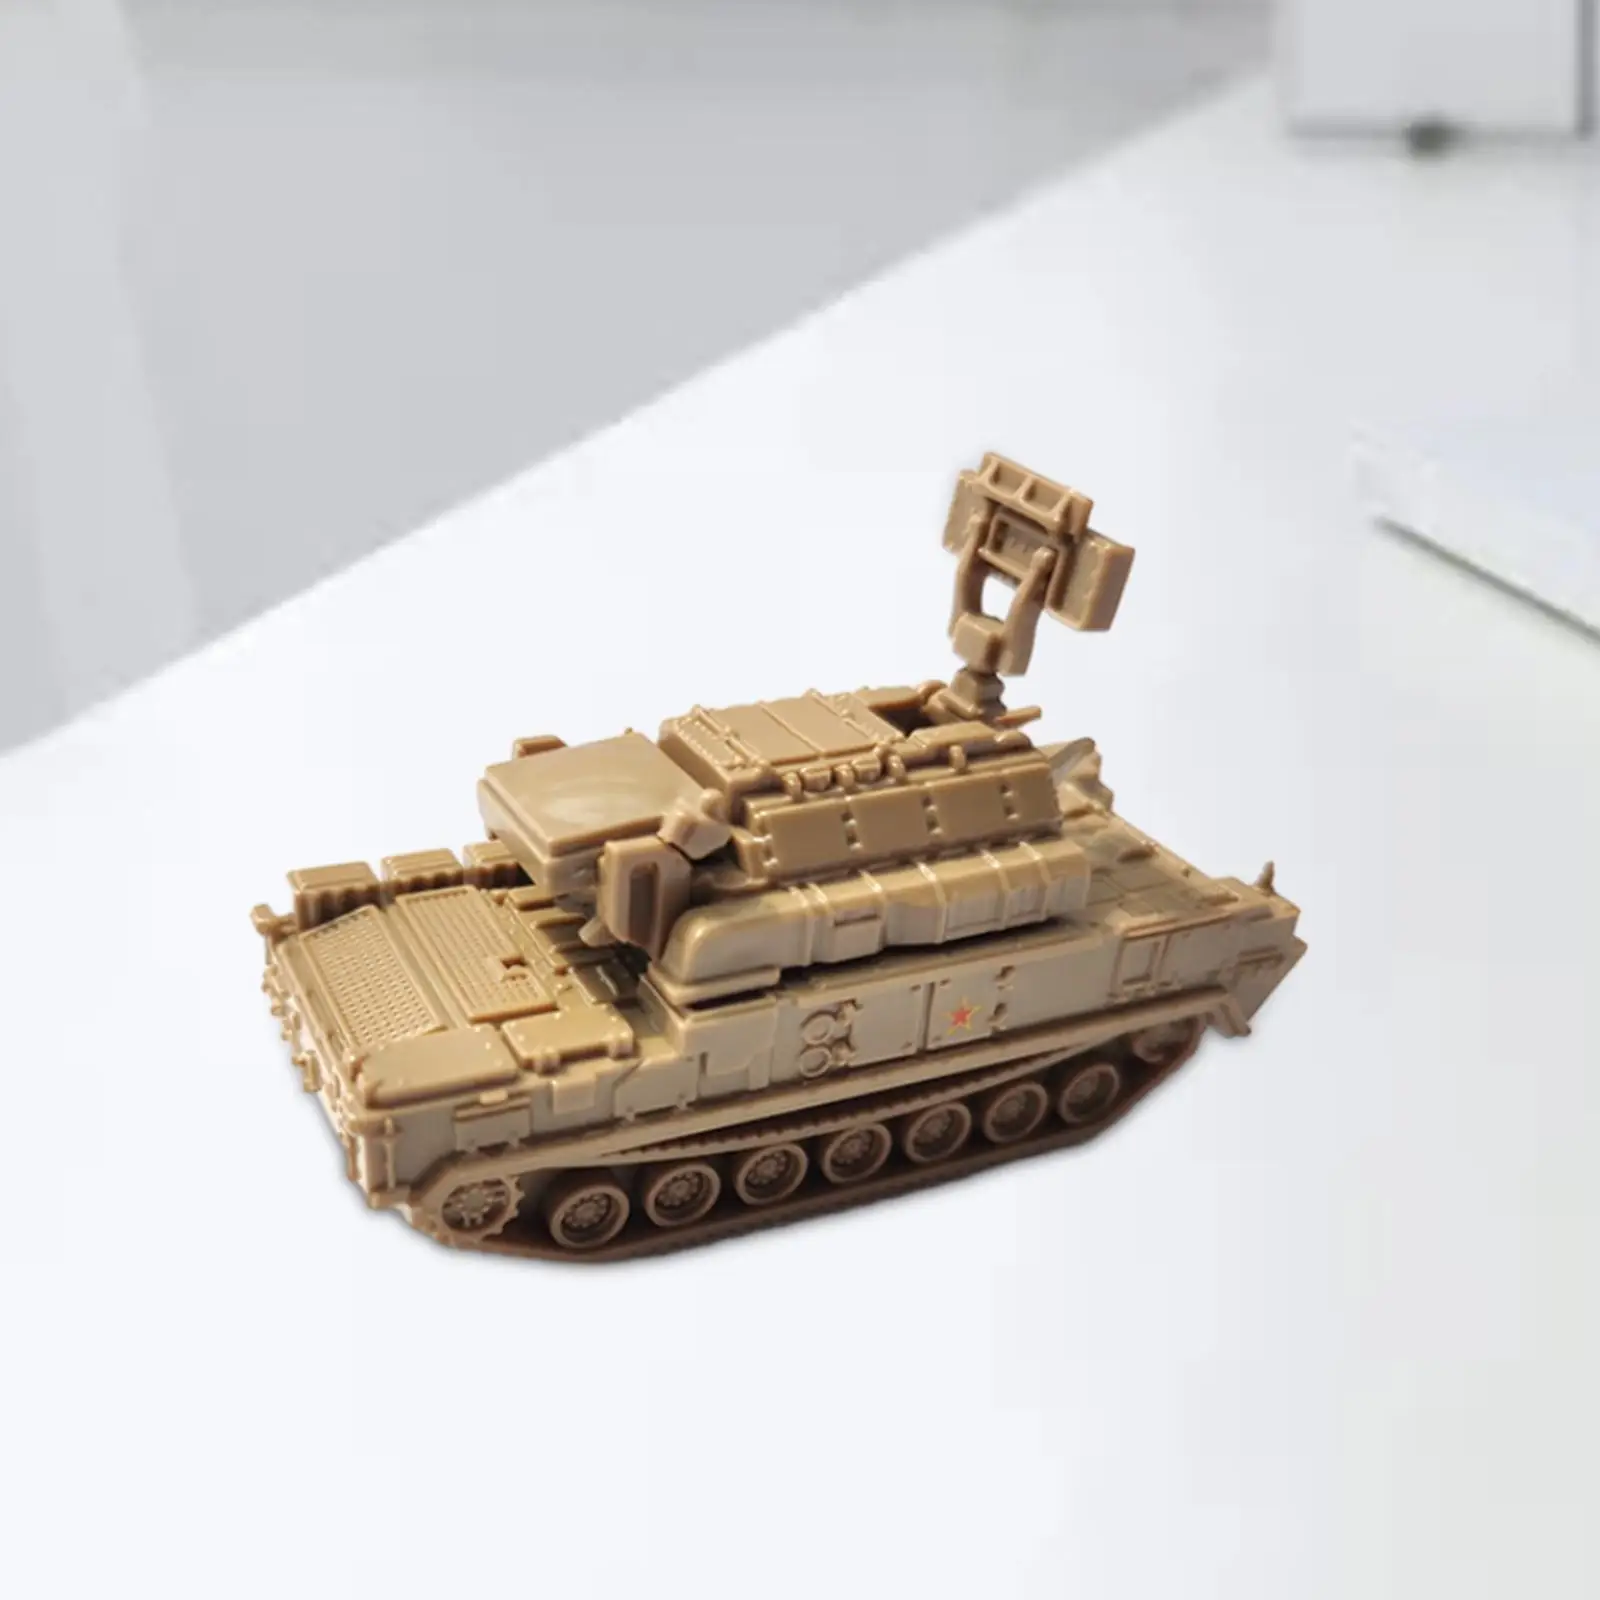 1:144 Building Model Kits DIY Assemble Education Toy 4D Tank Model Assembled Tank Model for Display Kids Gift Boys Collectibles